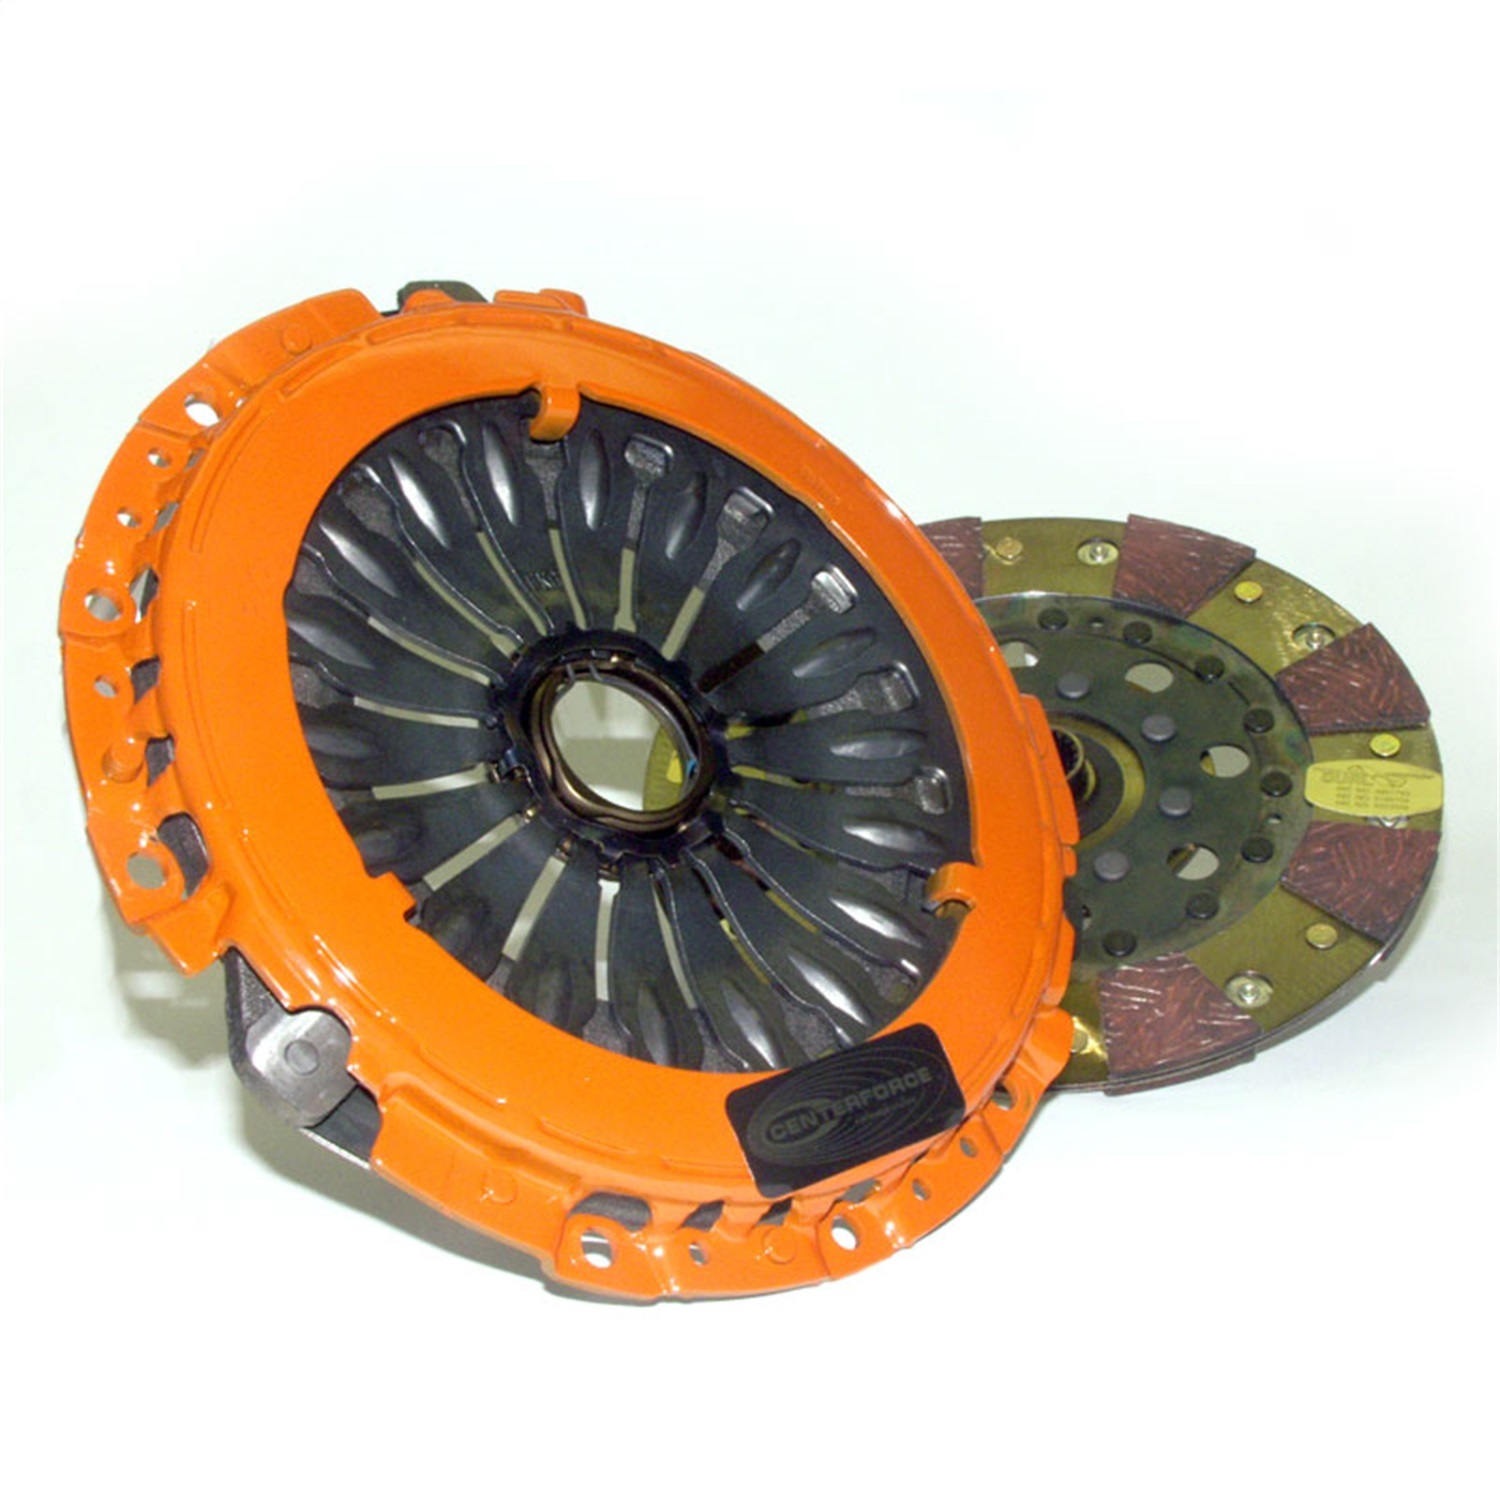 Centerforce Centerforce DF292271 Dual Friction Clutch Pressure Plate And Disc Set